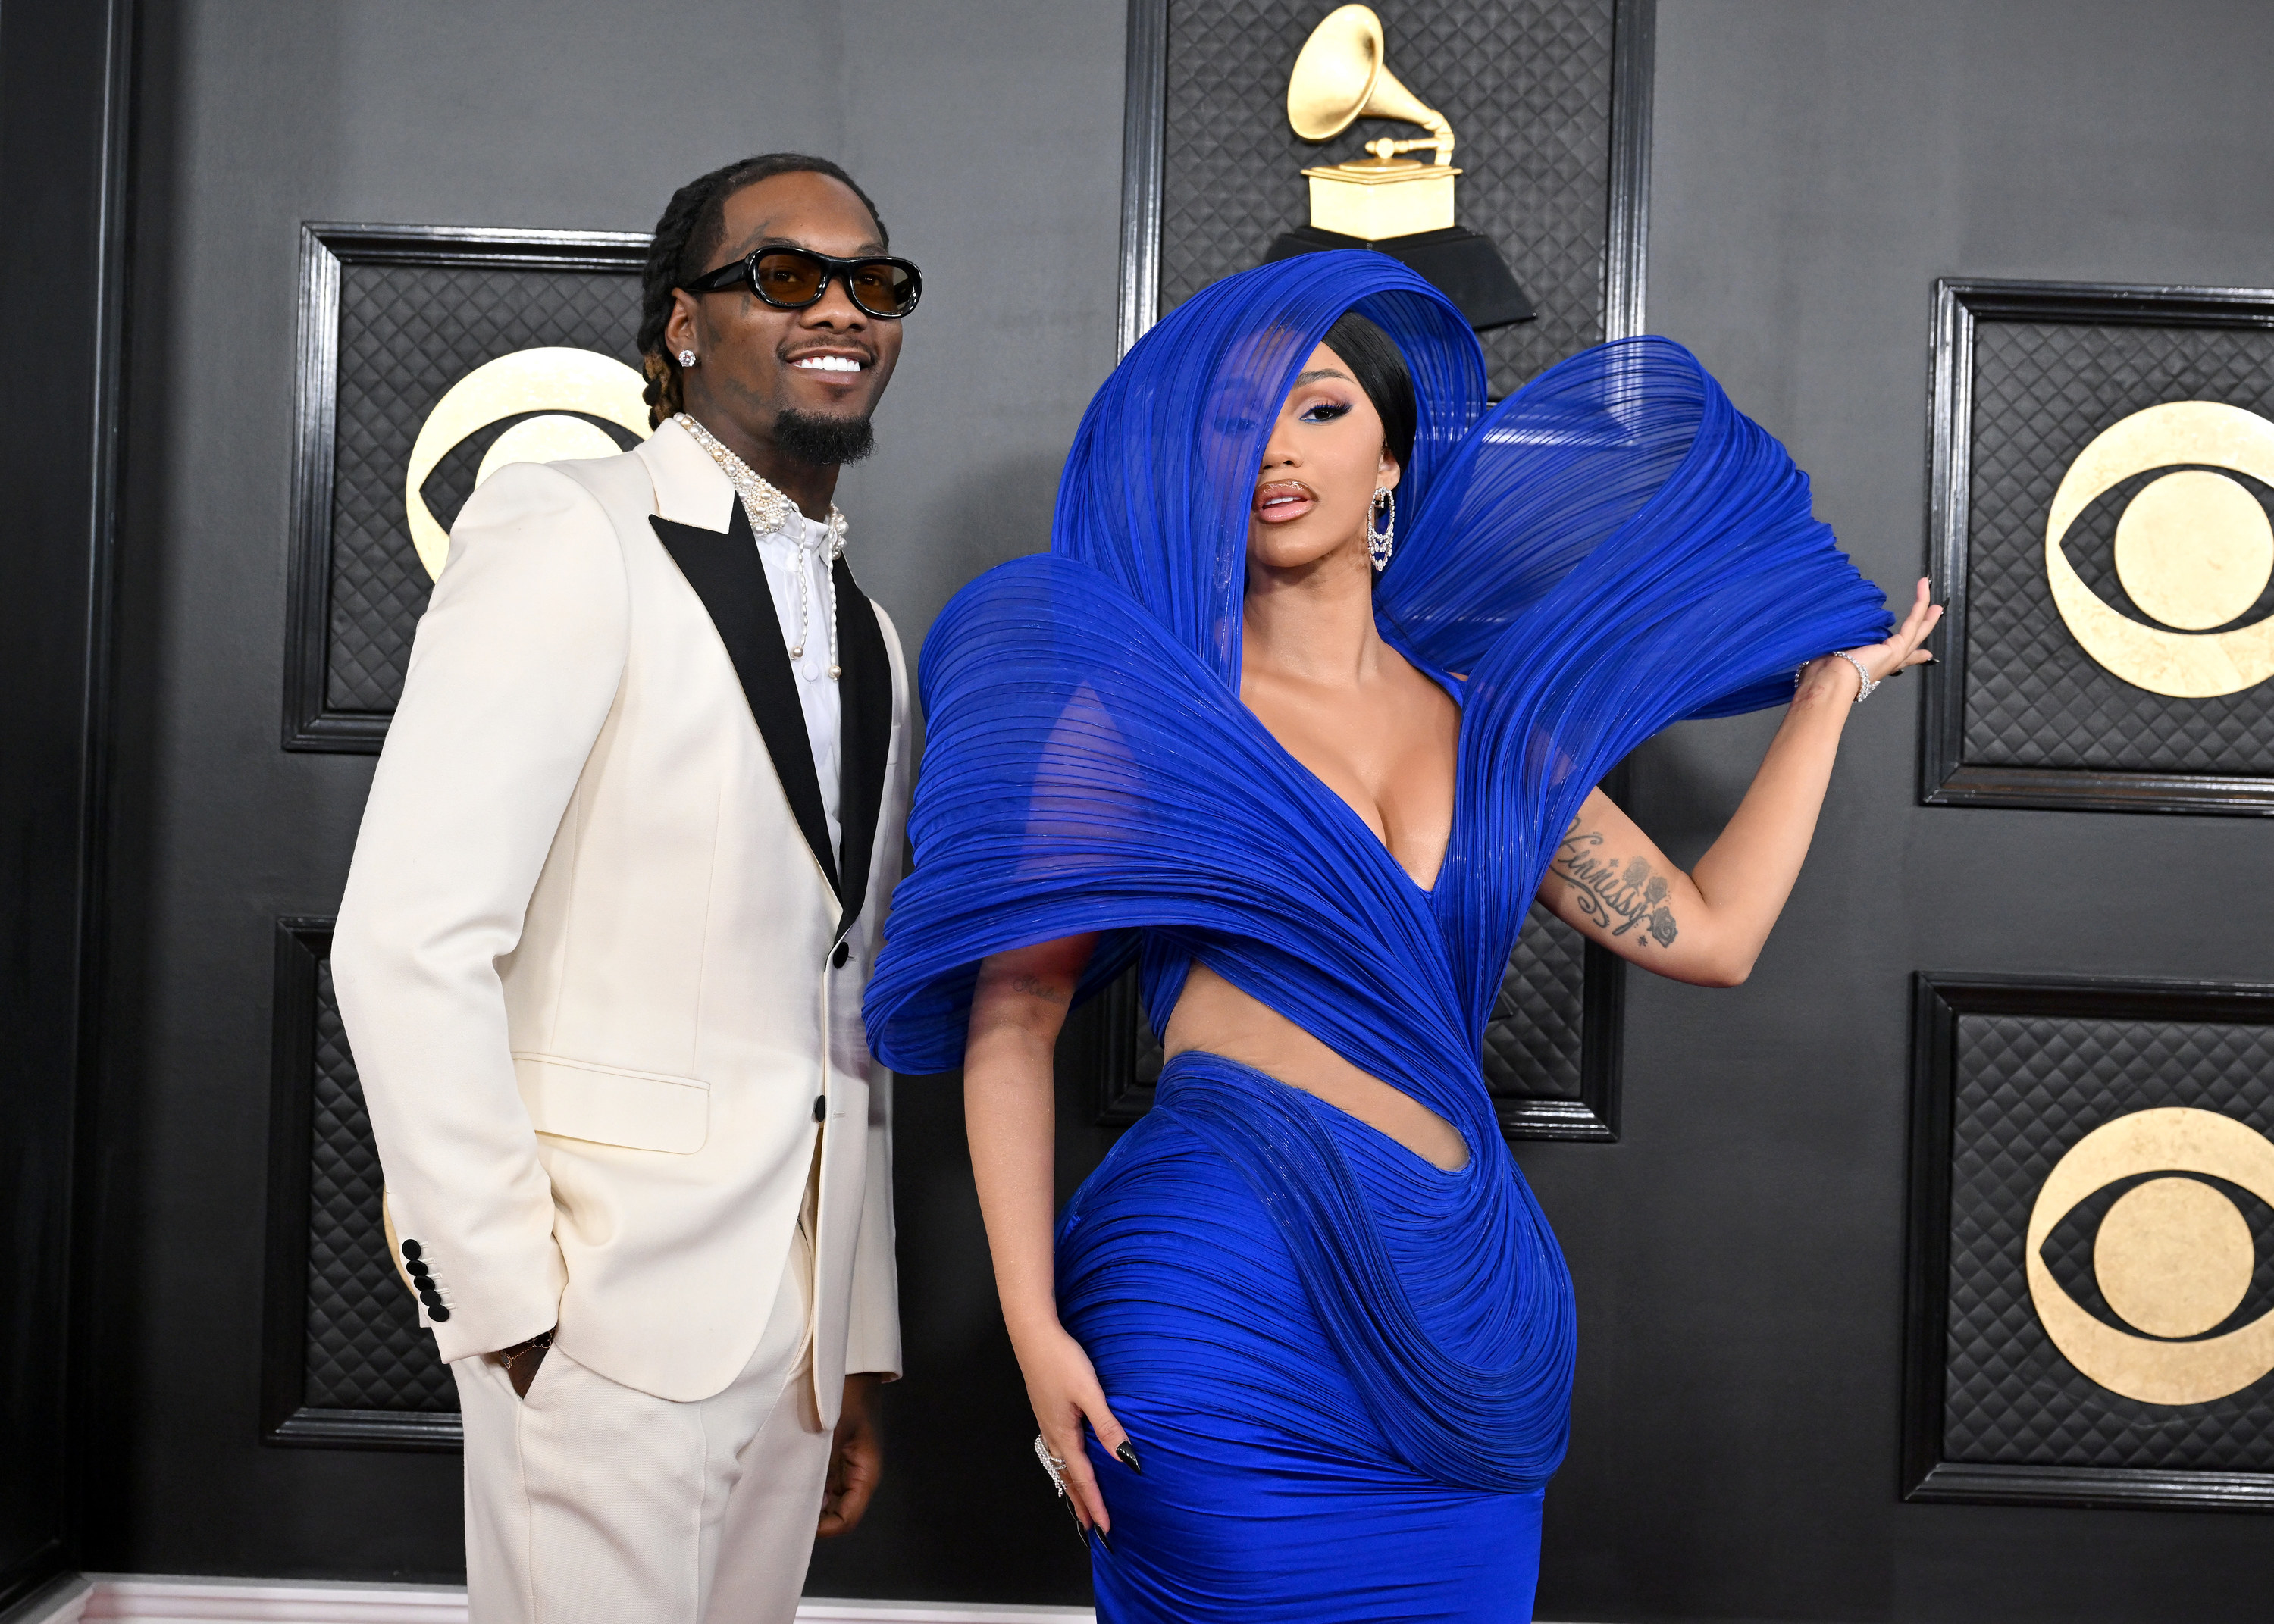 Cardi B and Offset at the Grammys